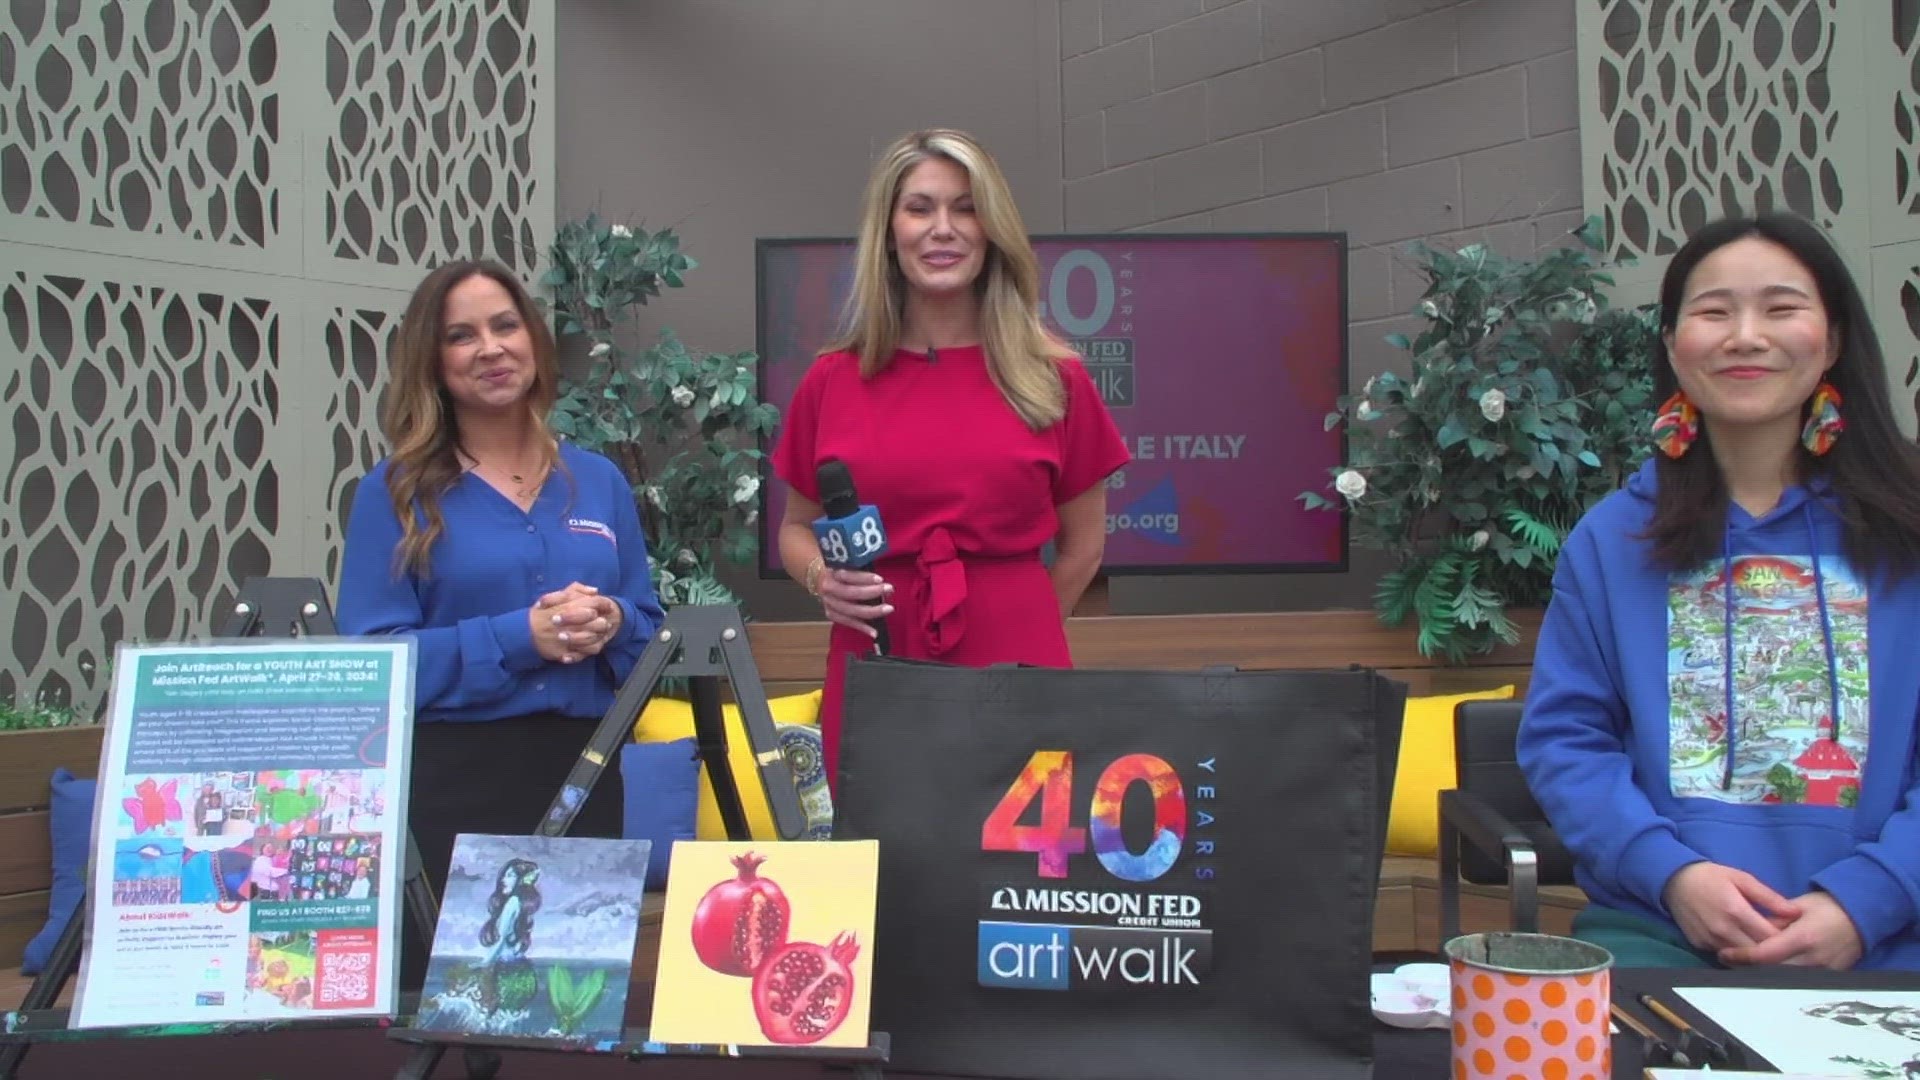 Courtney Pendleton from Mission Fed and Becca Dwyer with ArtReach San Diego joined the FOUR to talk about the fine art festival back for its 40th year in San Diego.